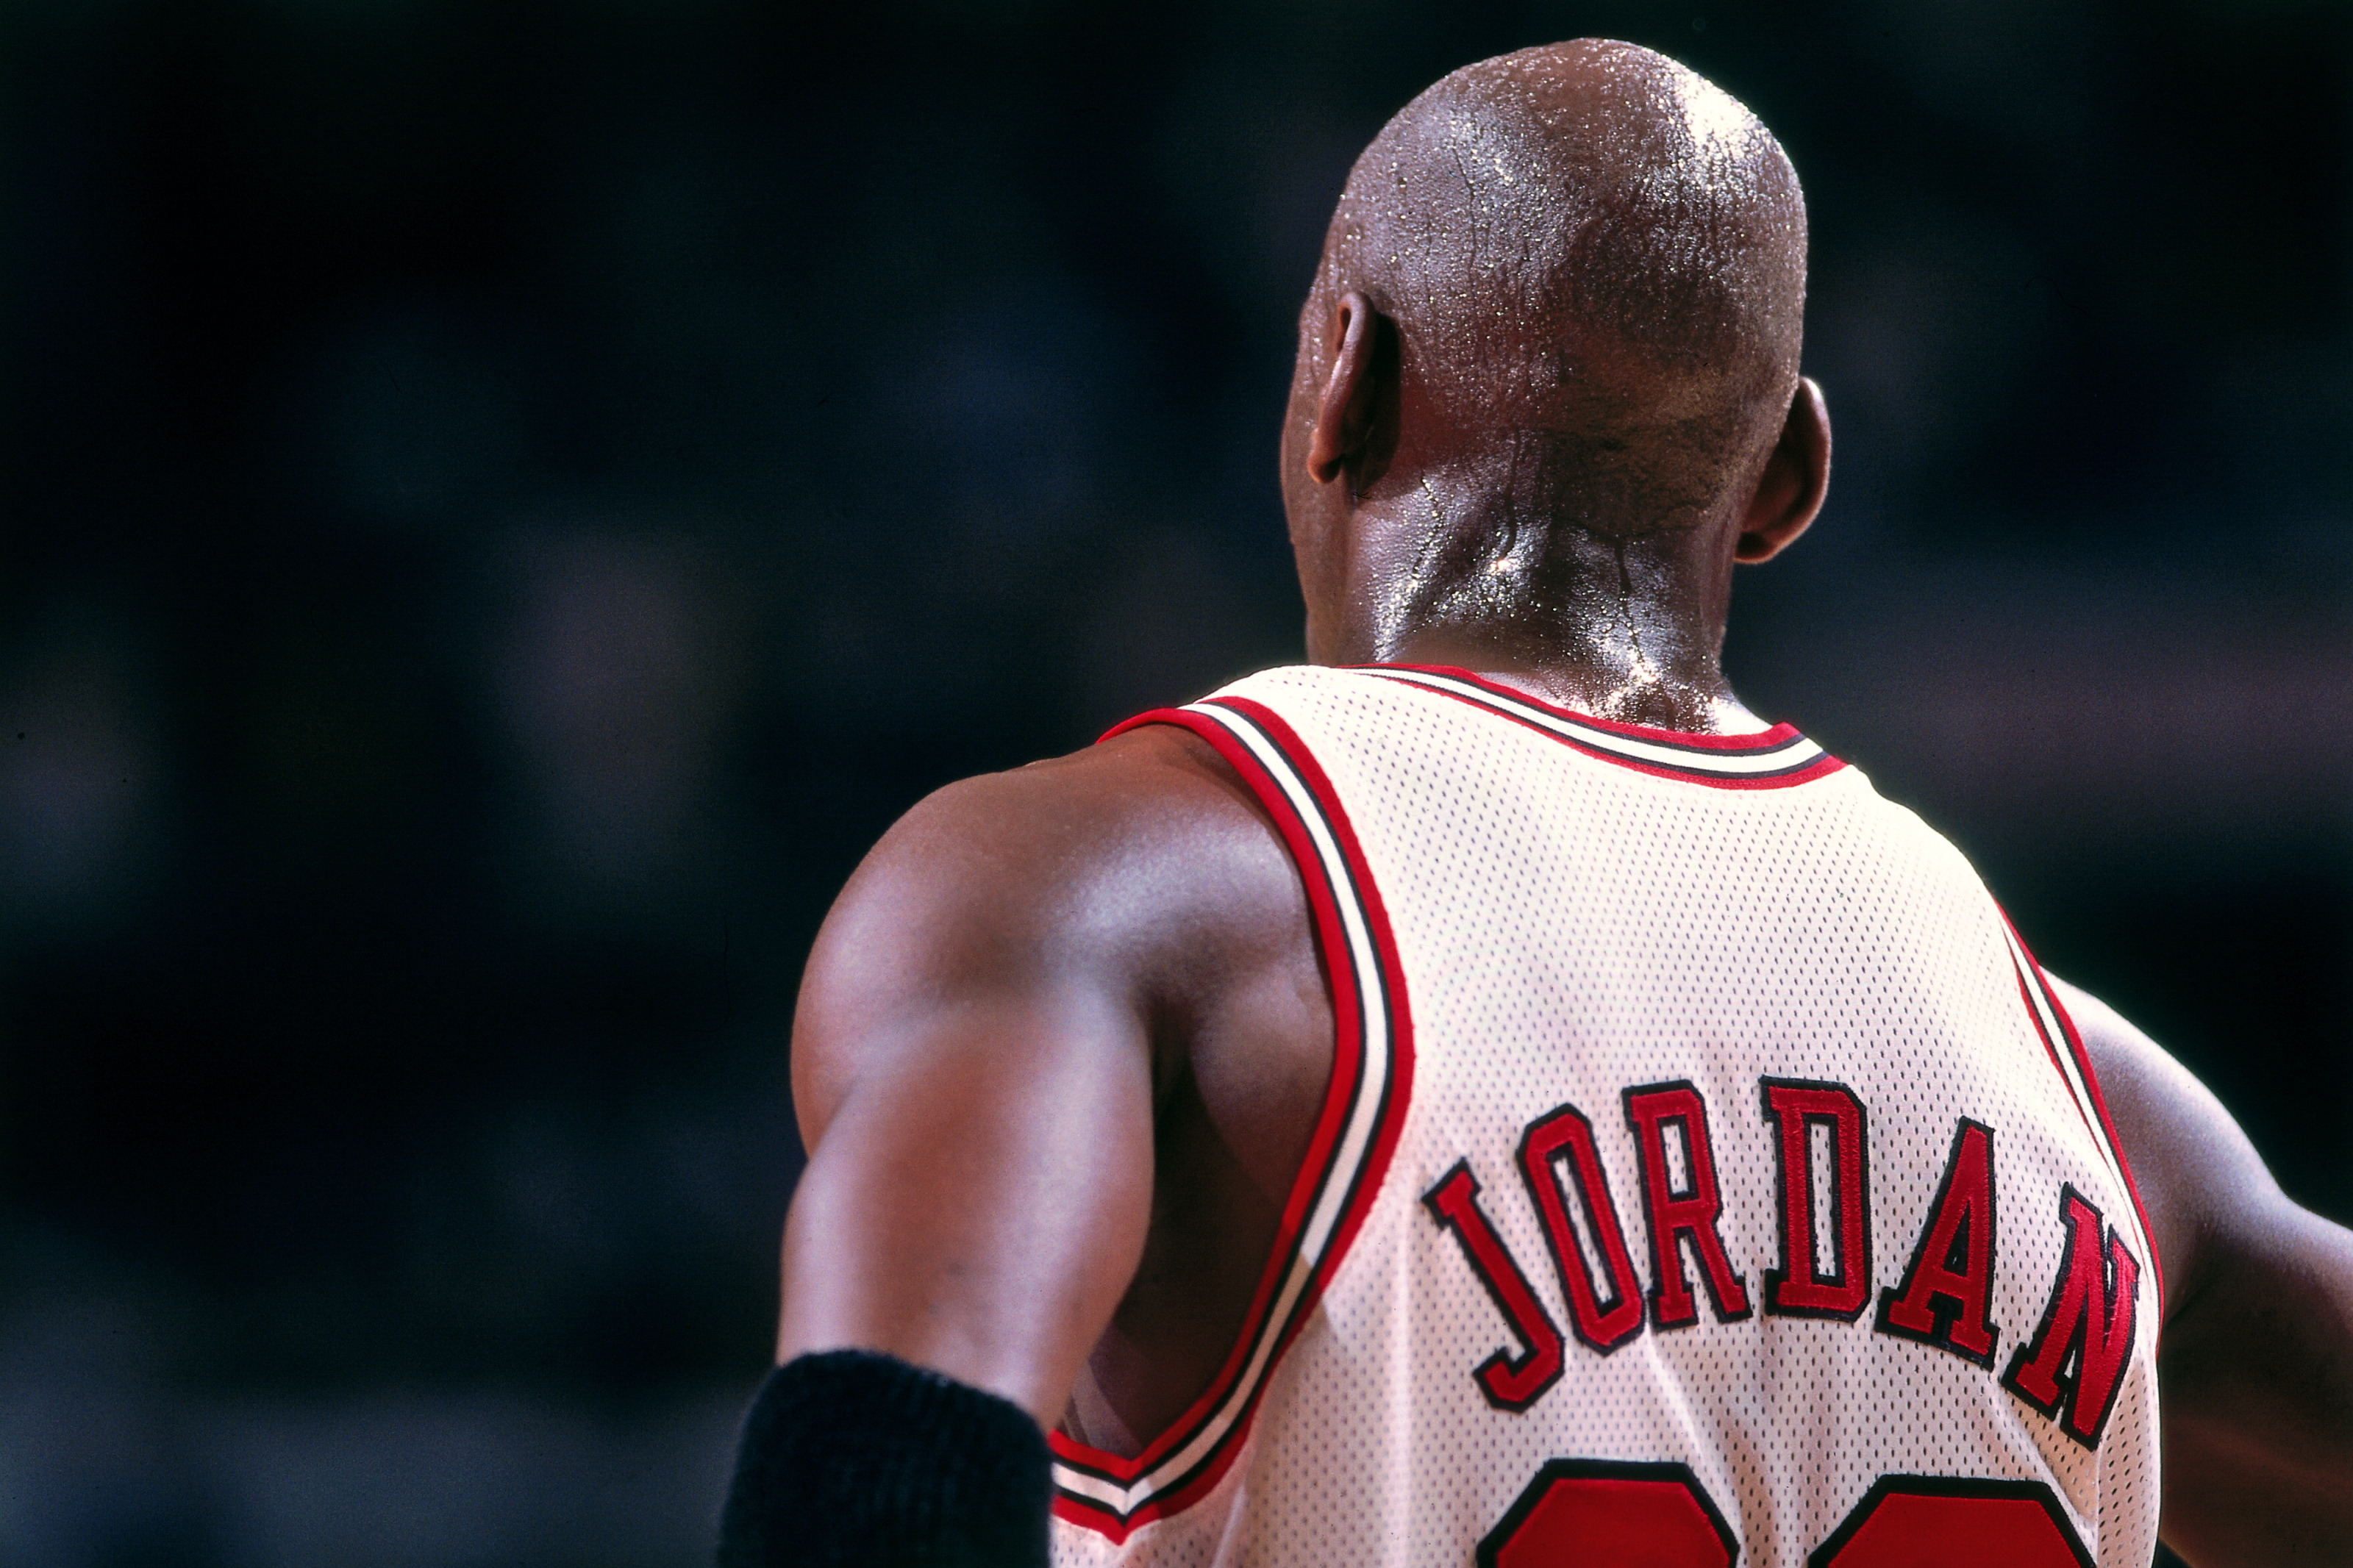 Michael Jordan of the Chicago Bulls looks on during the game. News Photo  - Getty Images